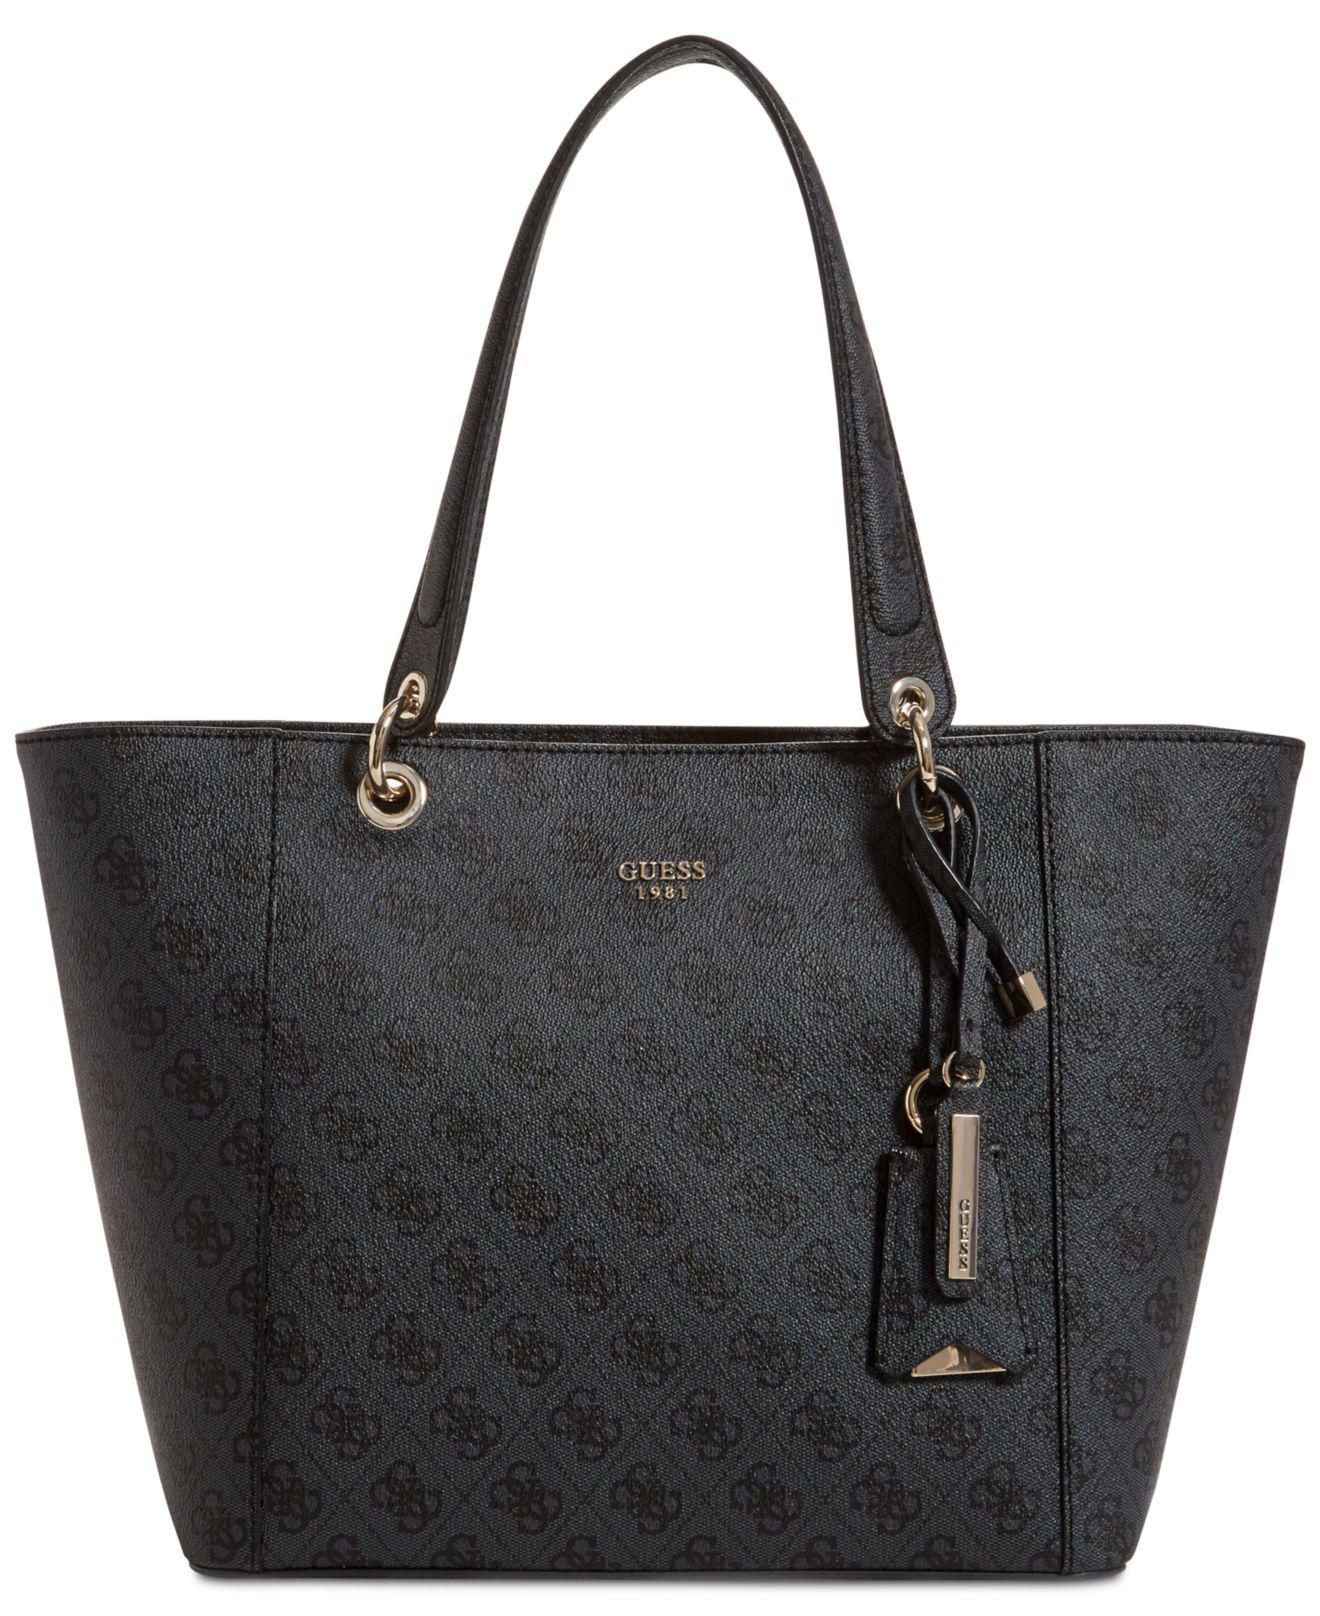 Guess Kamryn Extra-large Tote in Black - Lyst